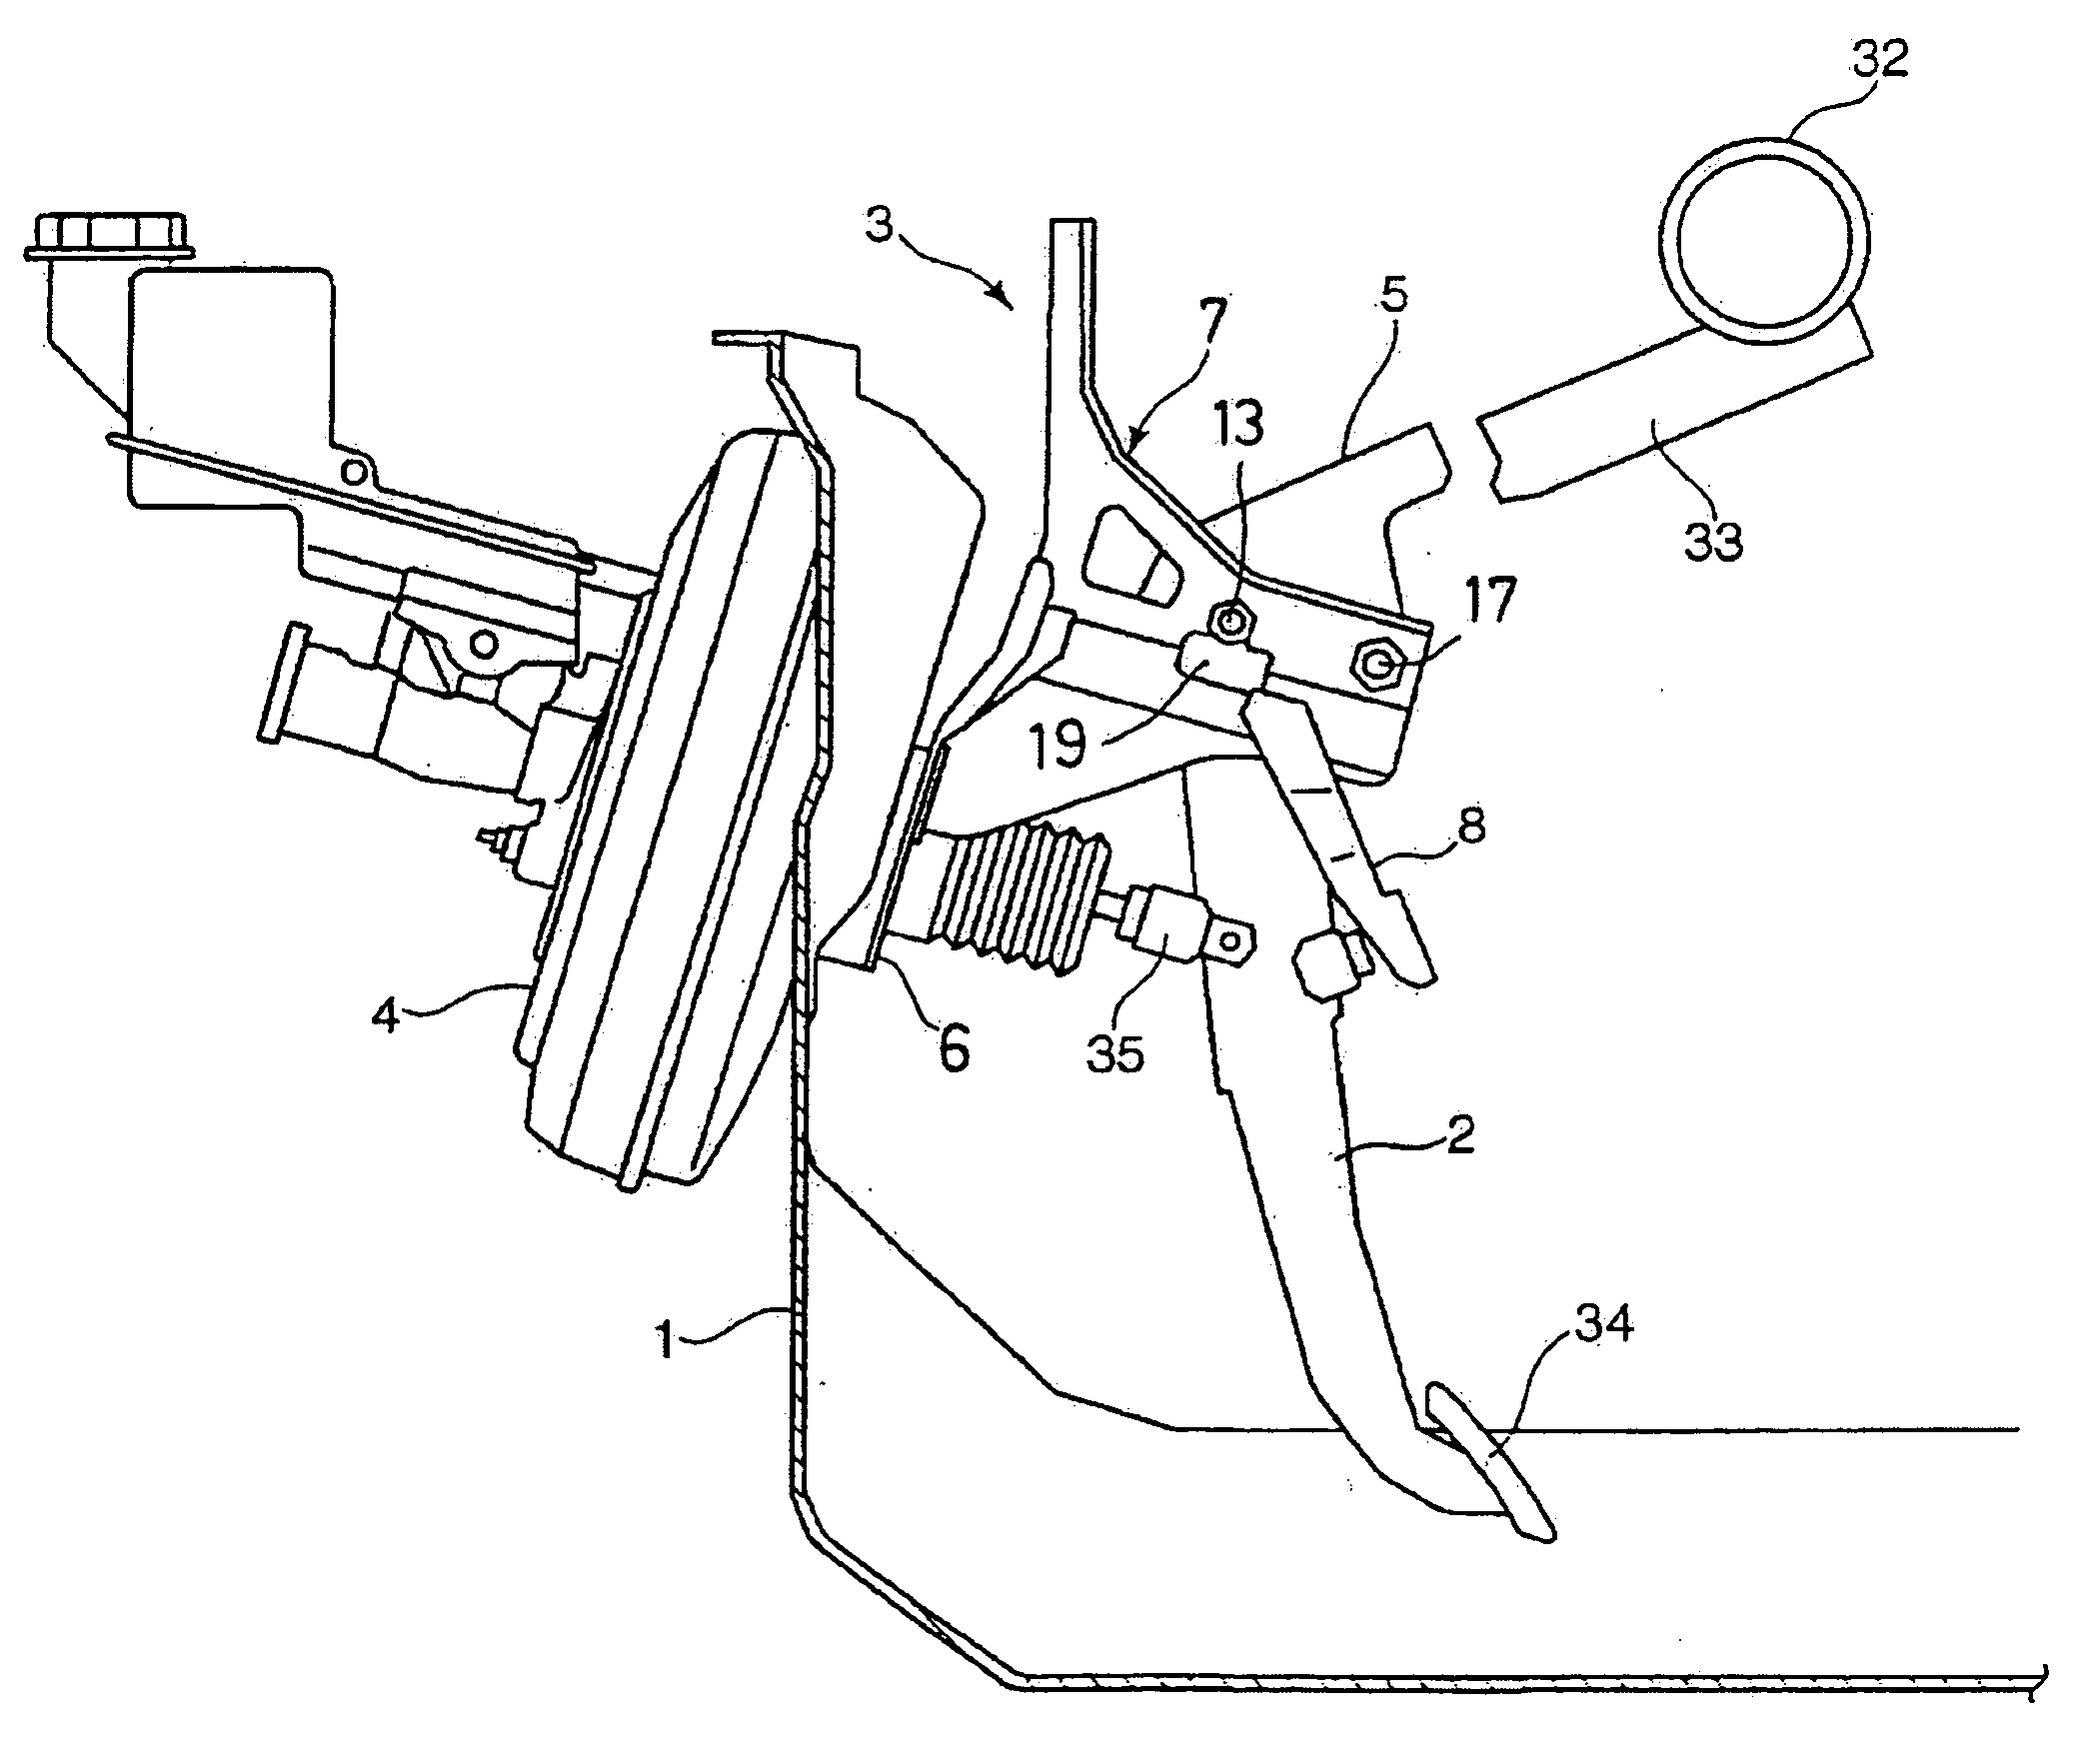 Operating pedal support structure